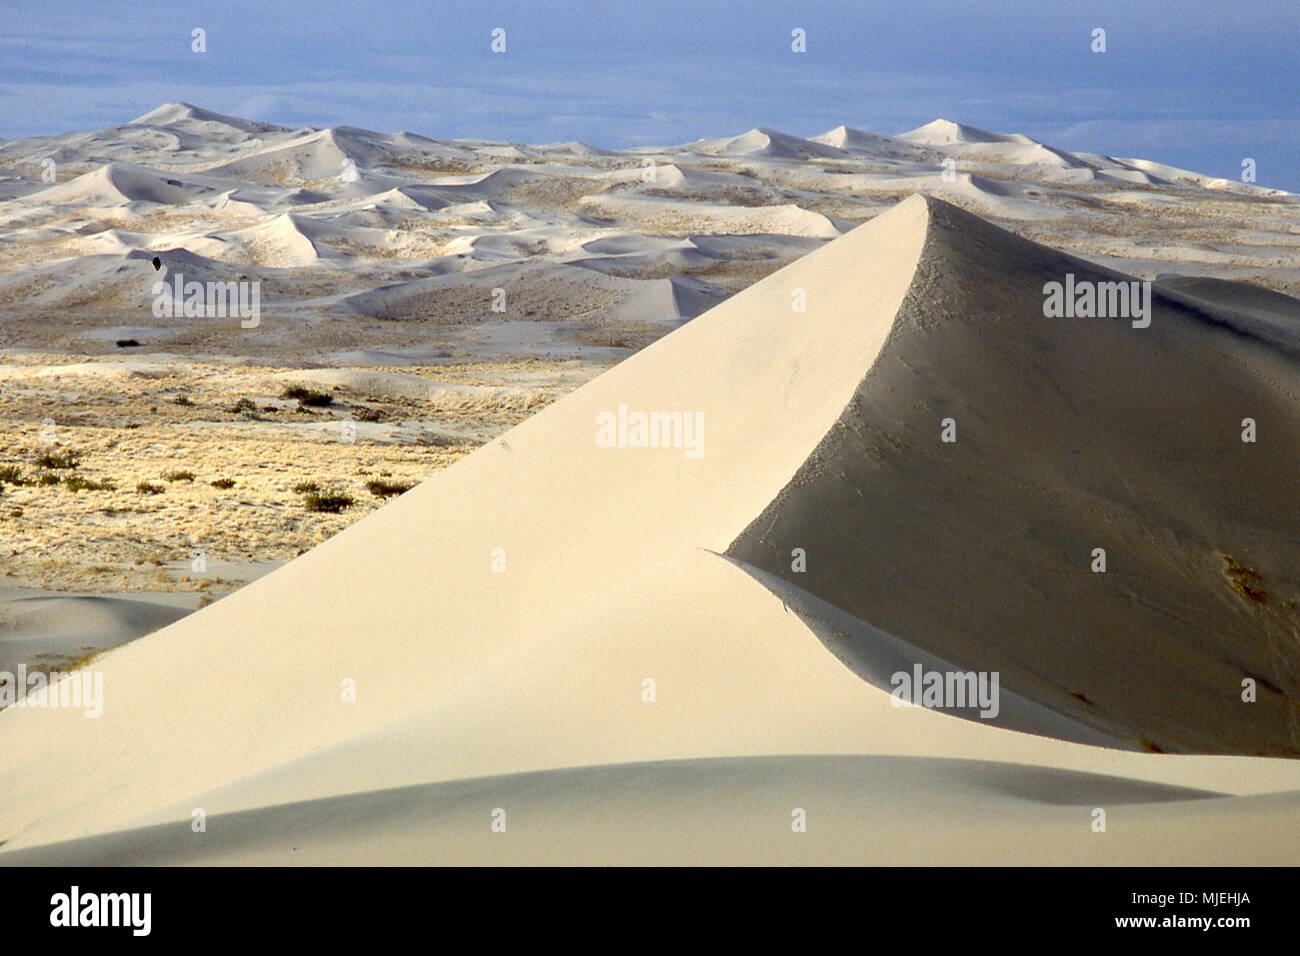 Kelso Dunes in the Mojave Desert in Caifornia Stock Photo